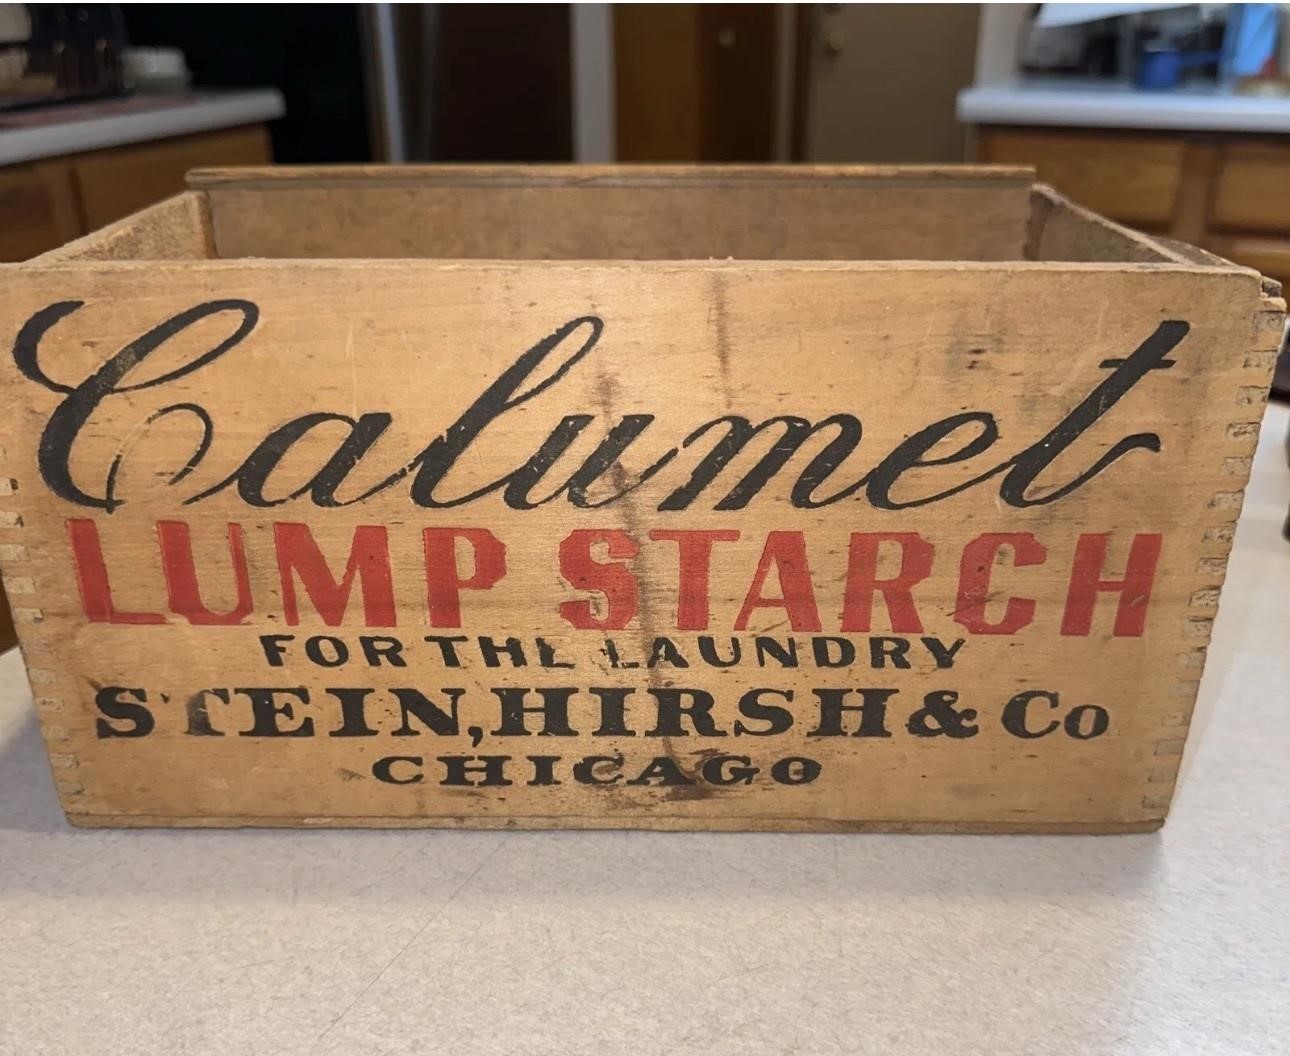 CALUMET LUMP STARCH FOR THE LAUNDRY ADVERTISING